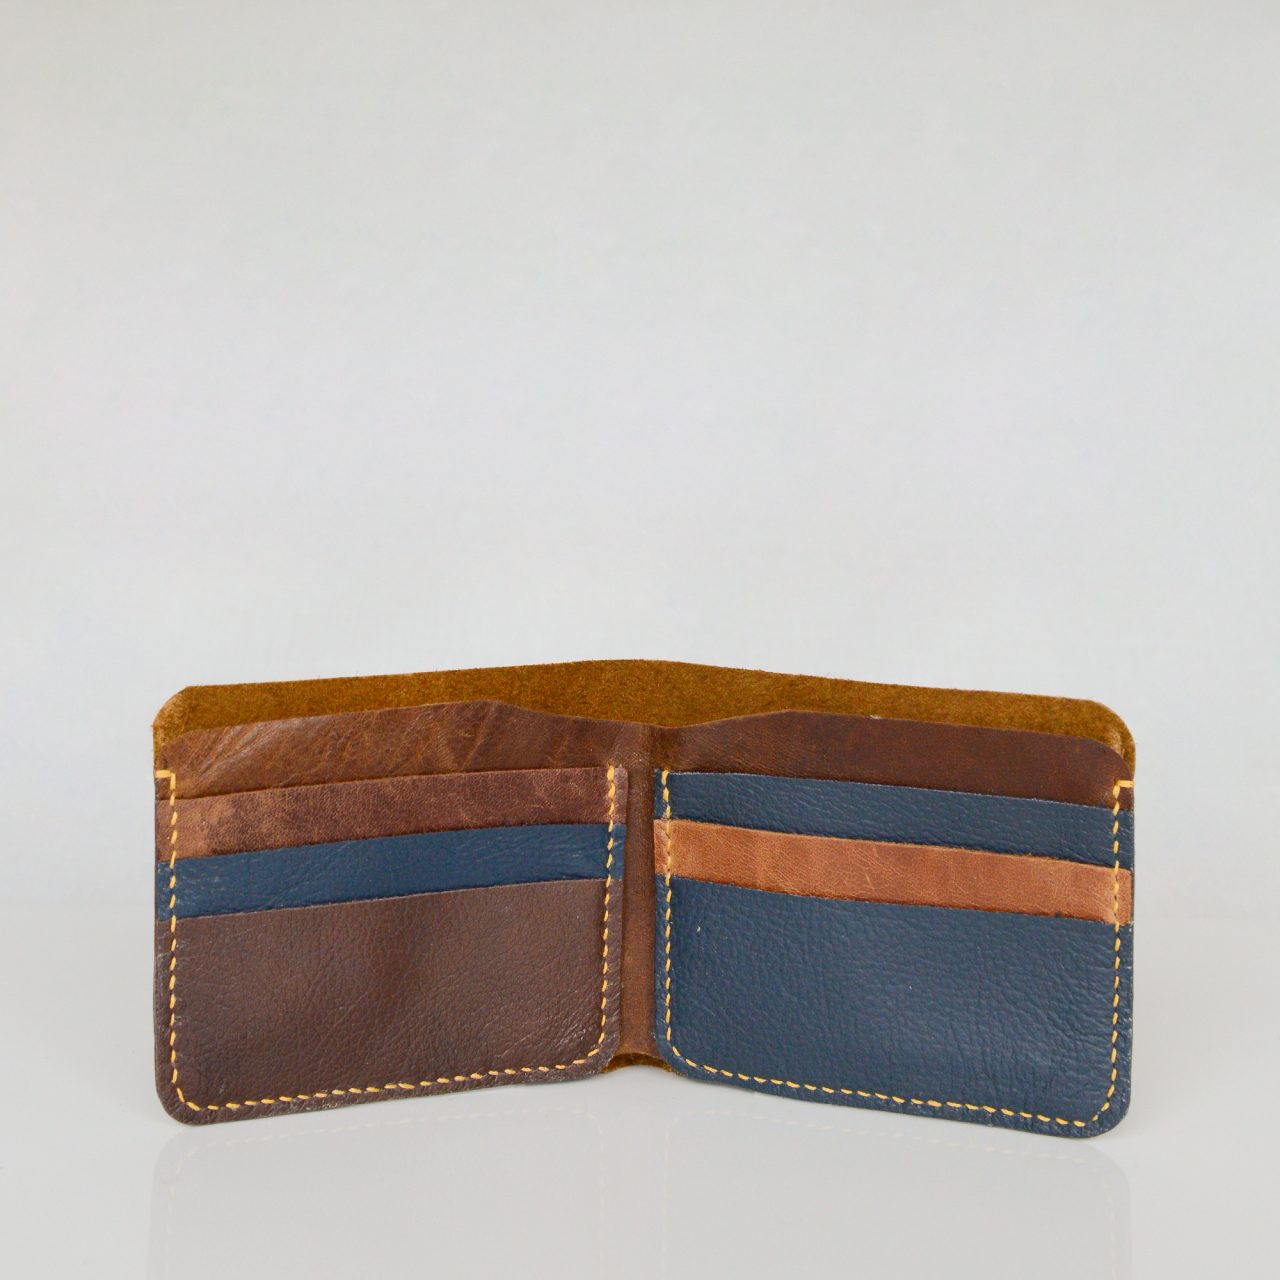 Zero waste wallet made from reclaimed and upcycled leather